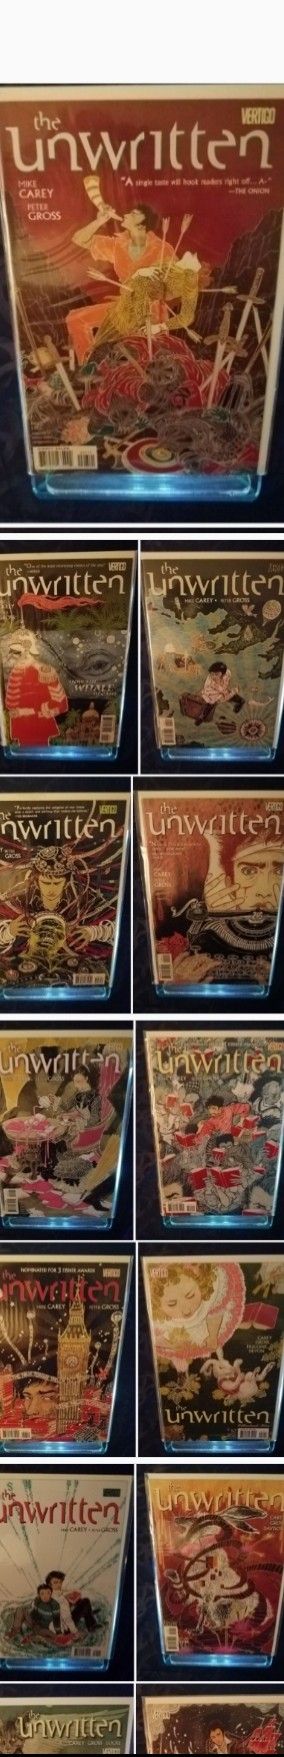 THE UNWRITTEN: 47 COMIC BOOK COLLECTION